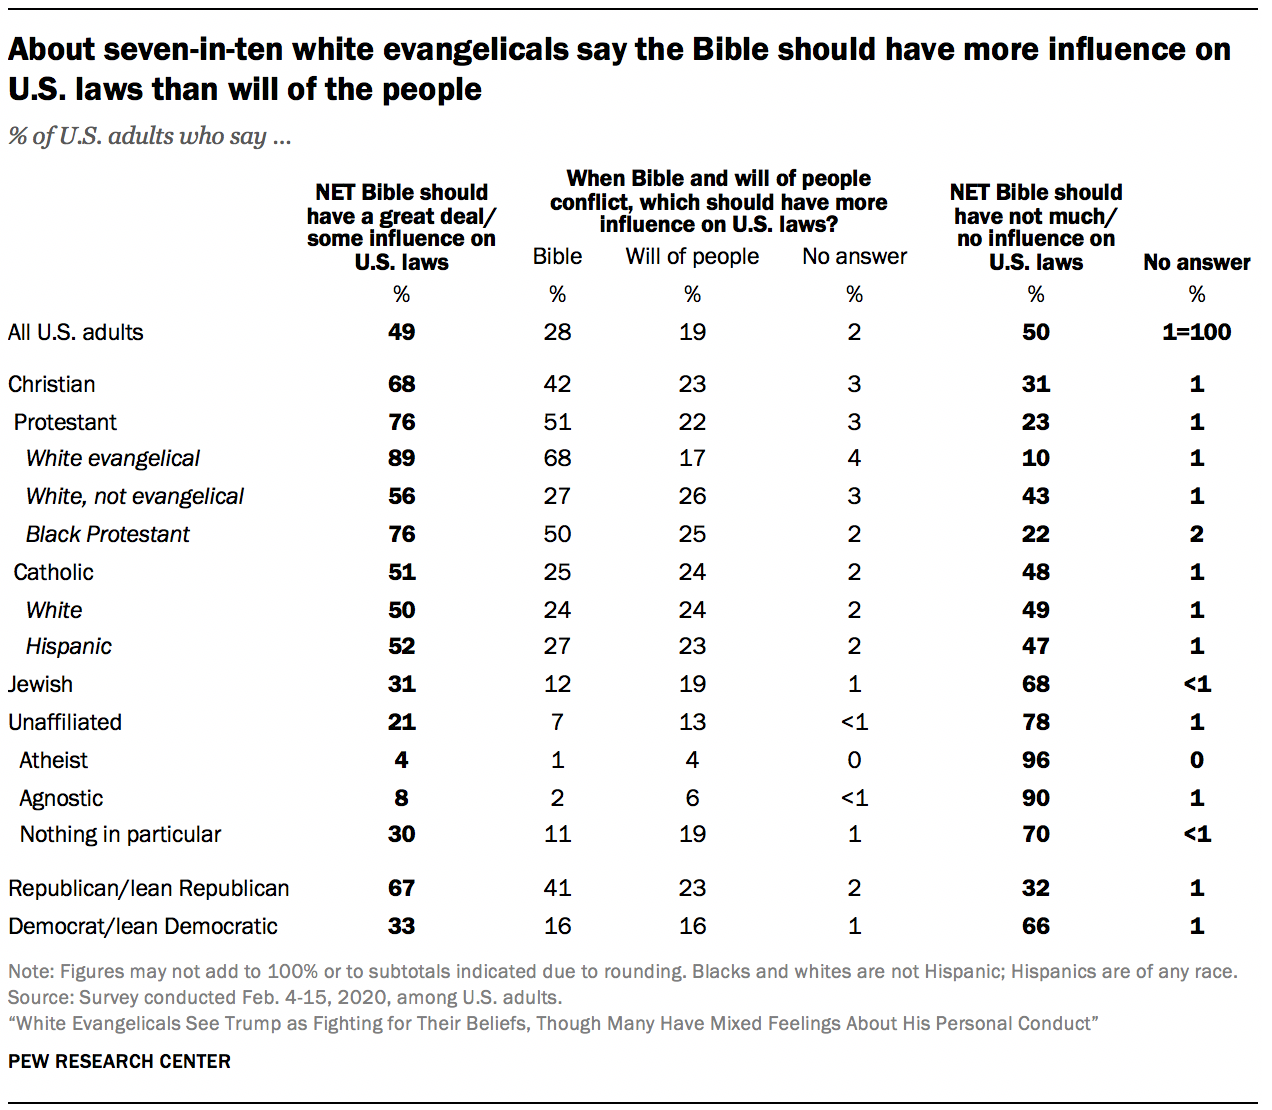 About seven-in-ten white evangelicals say the Bible should have more influence on U.S. laws than will of the people